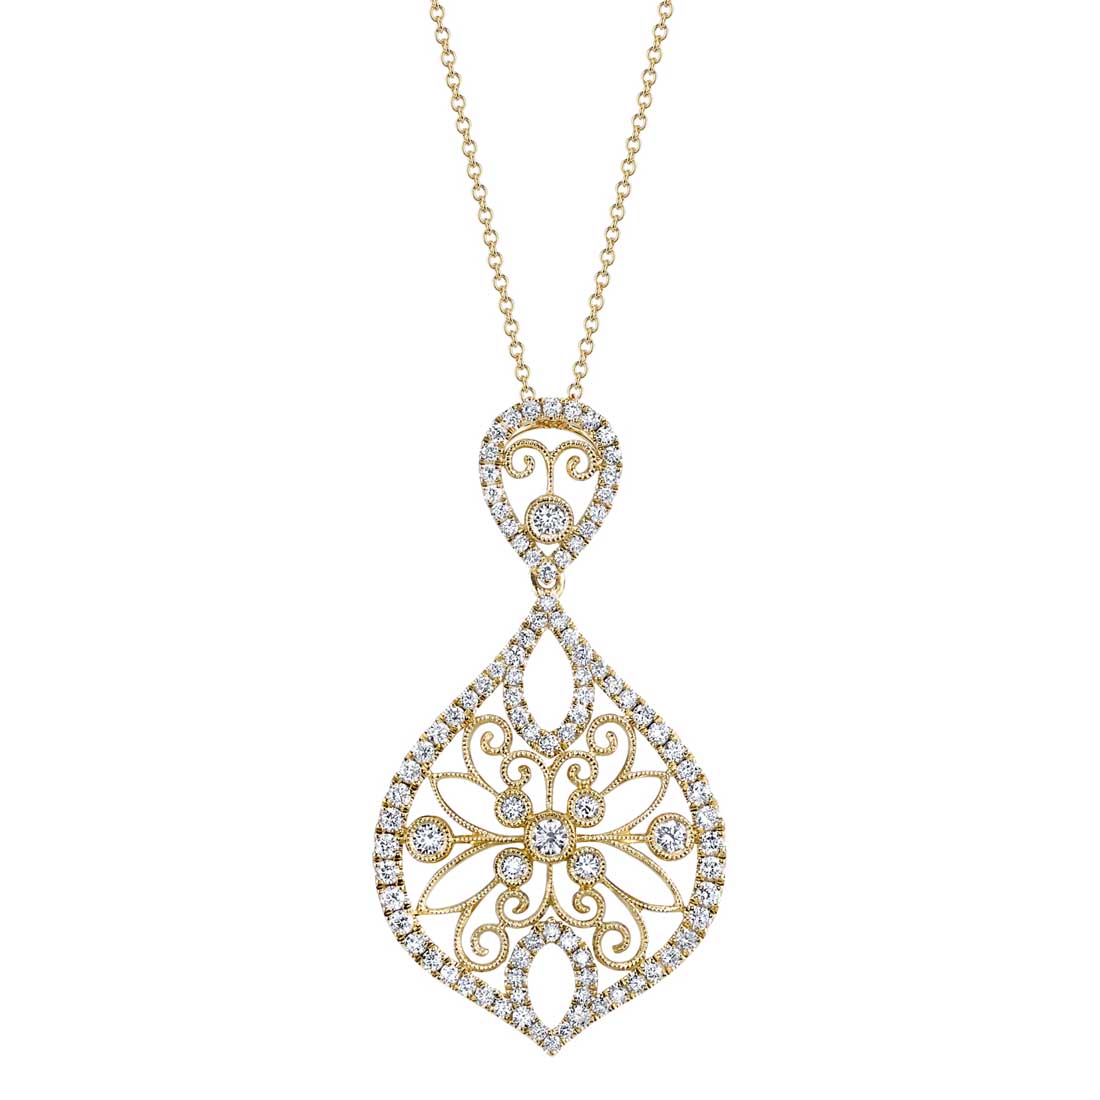 Vintage Diamond Necklace in Yellow Gold